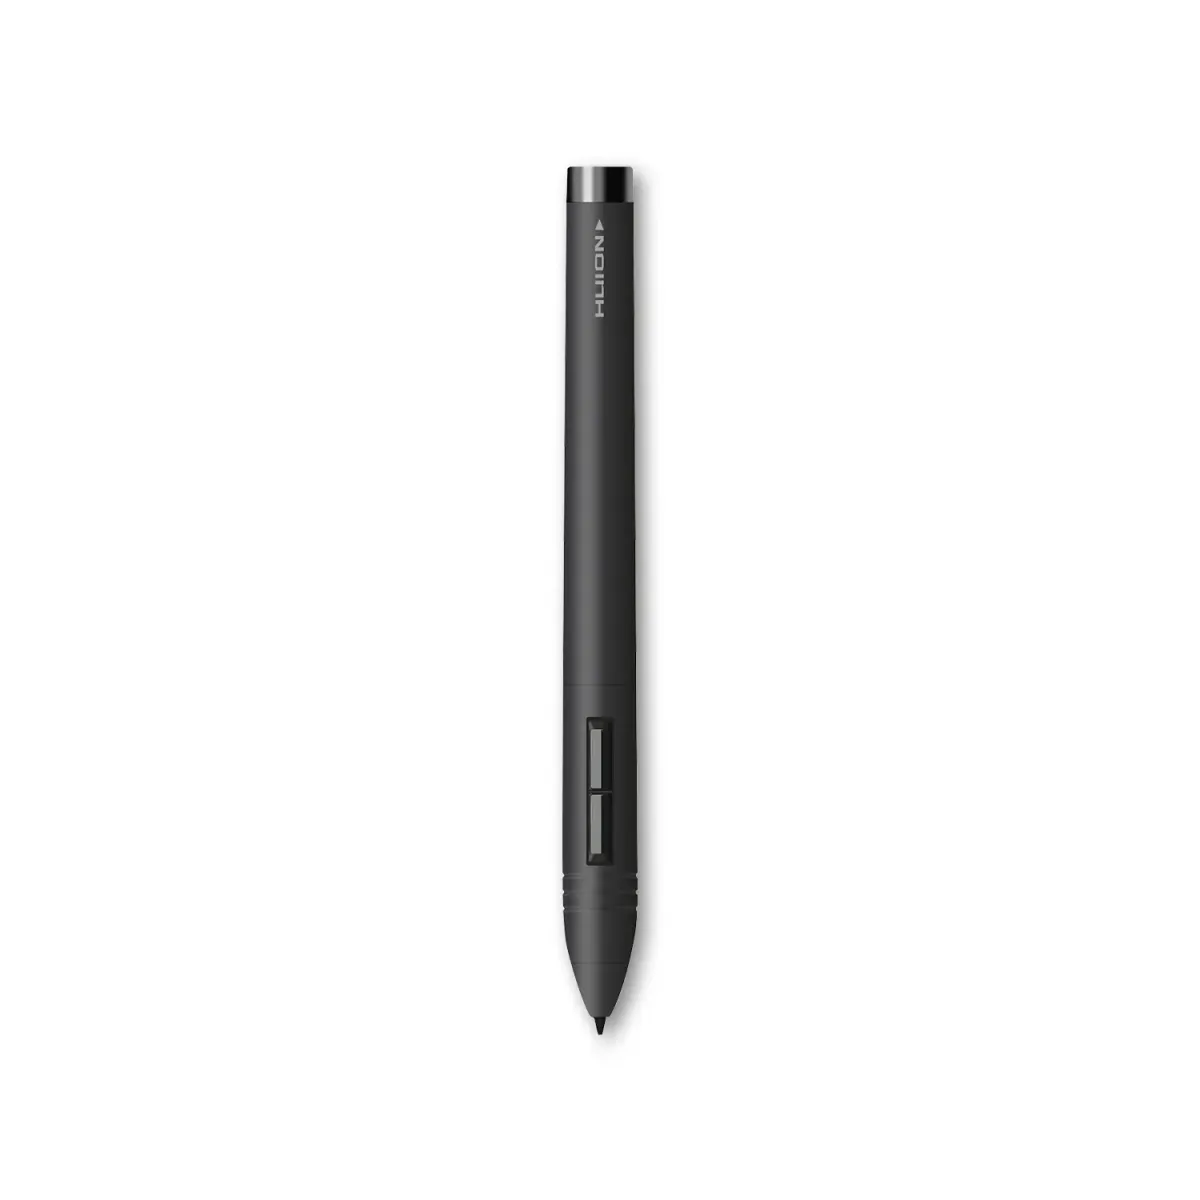 Huion A2 Large size LED Light Pad  Huion Official Store: Drawing Tablets,  Pen Tablets, Pen Display, Led Light Pad